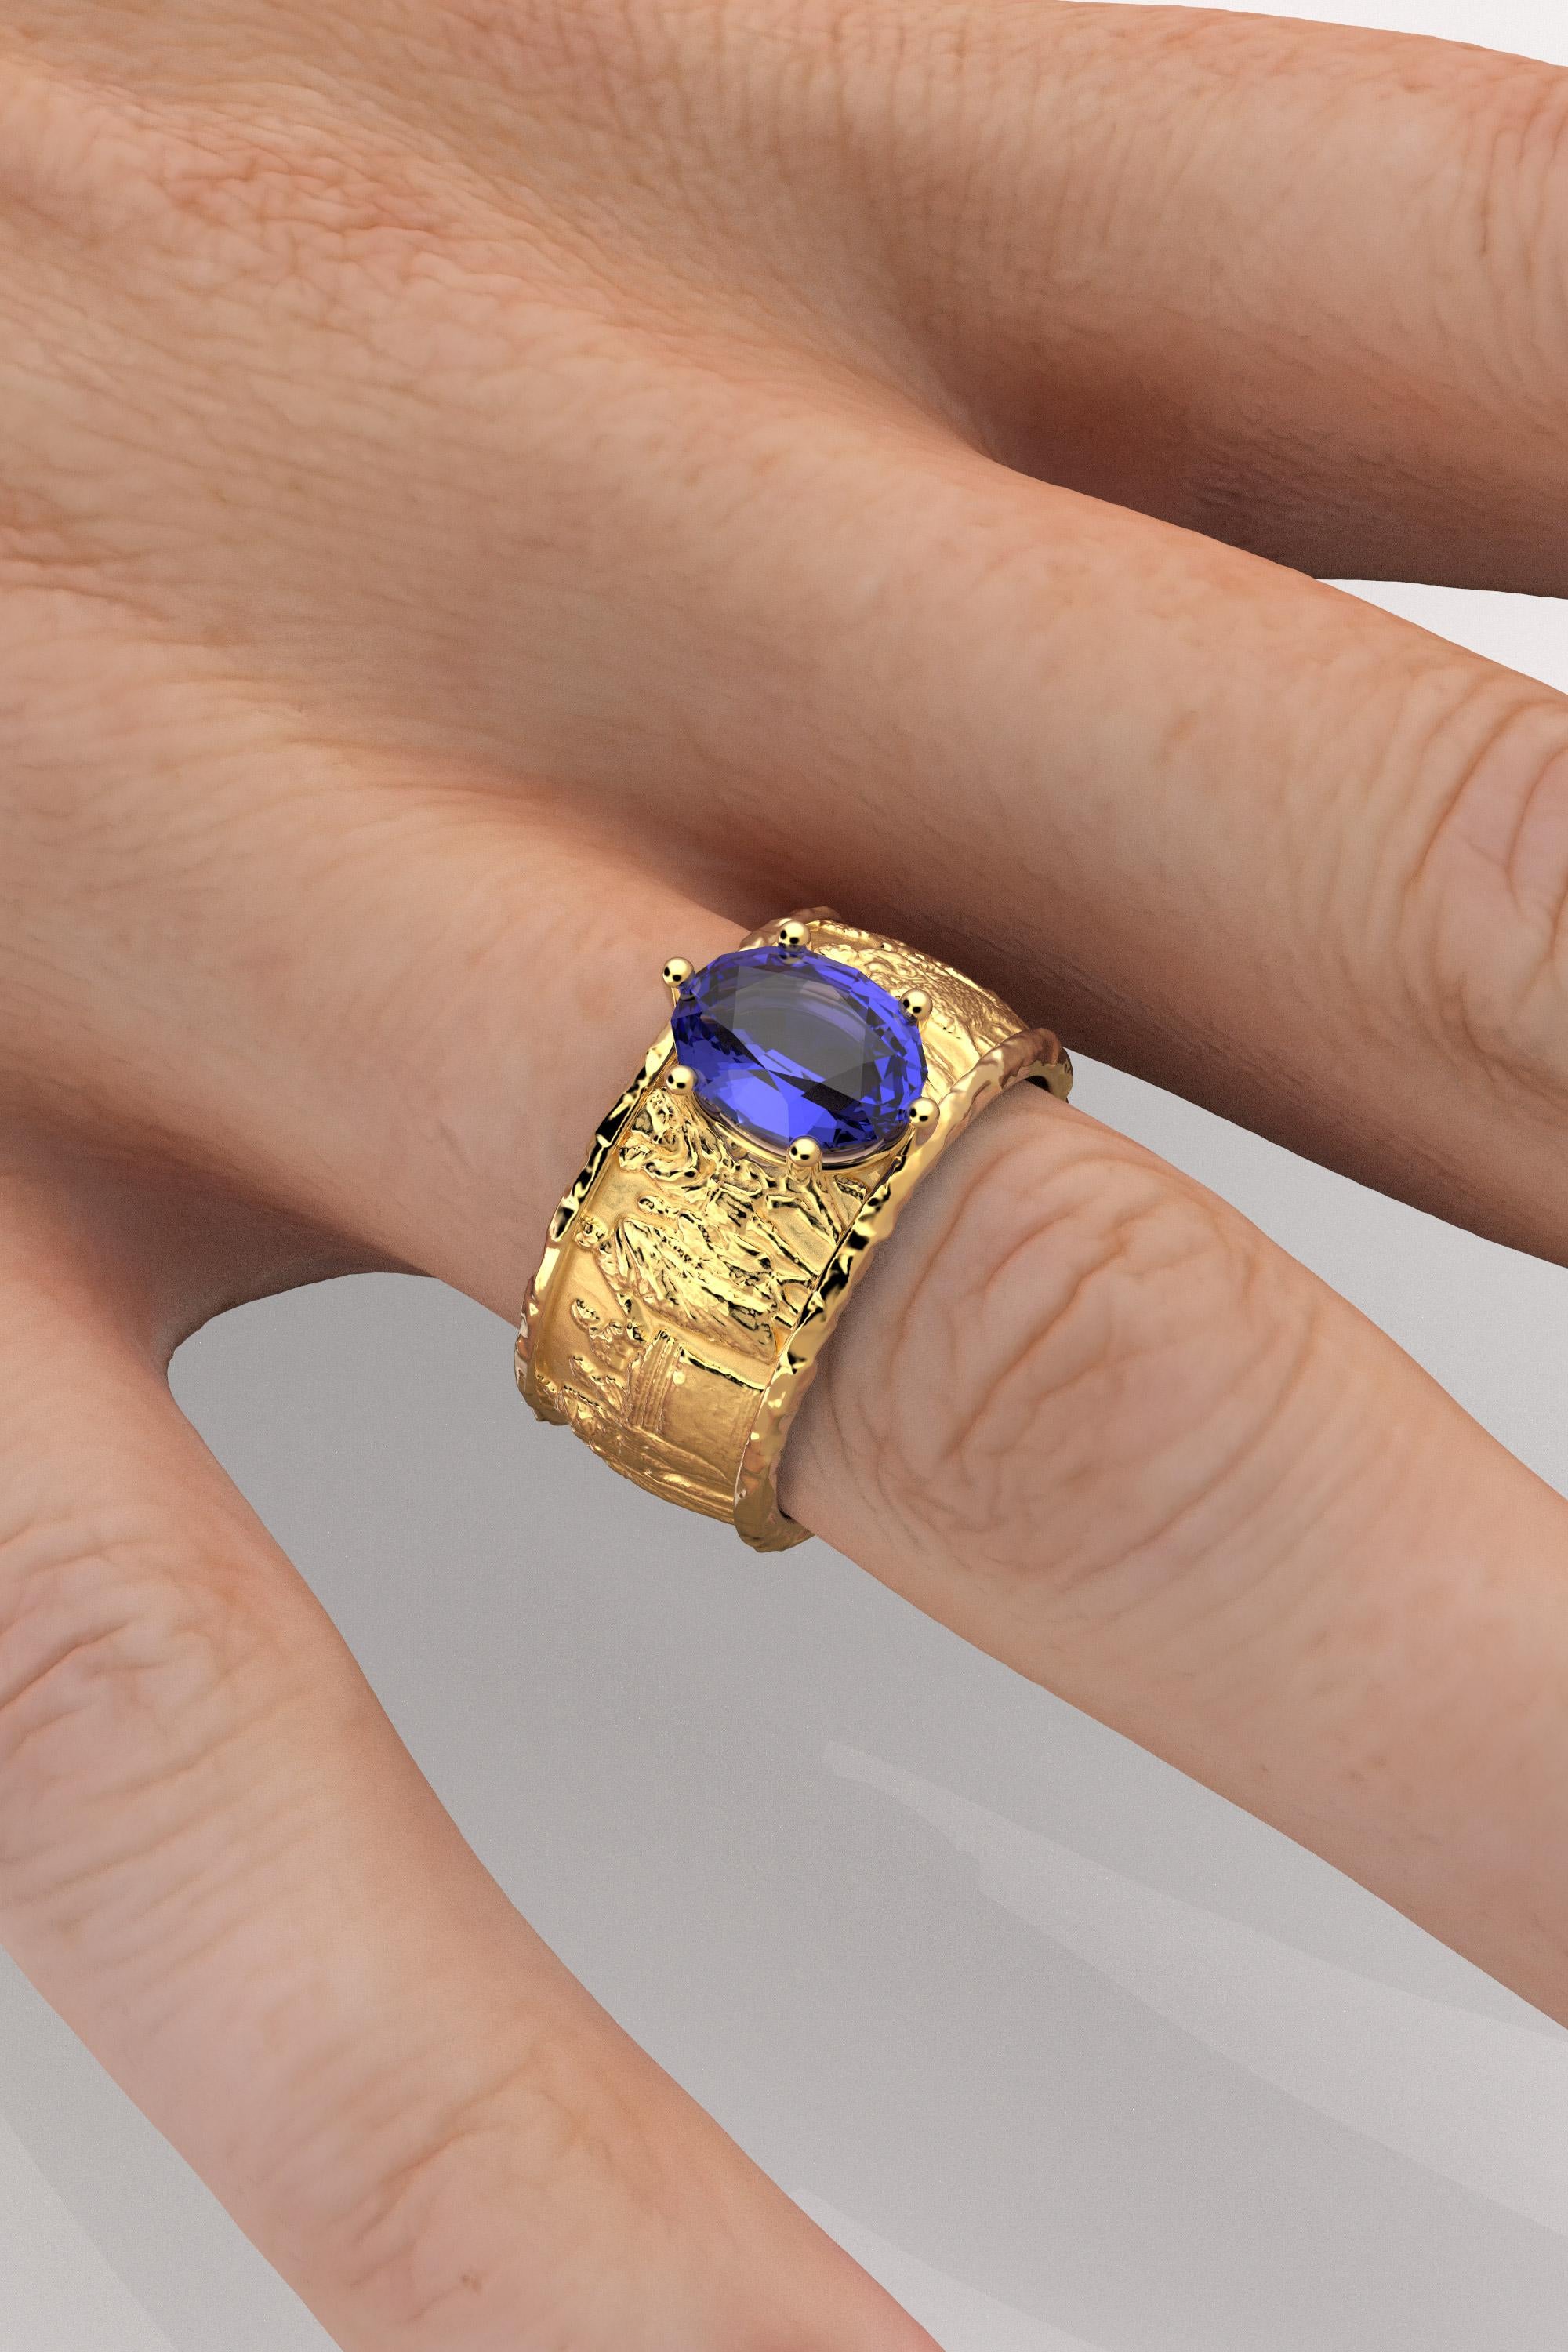 For Sale:  Tanzanite gold ring in 18k solid gold by Oltremare Gioielli made in Italy. 4